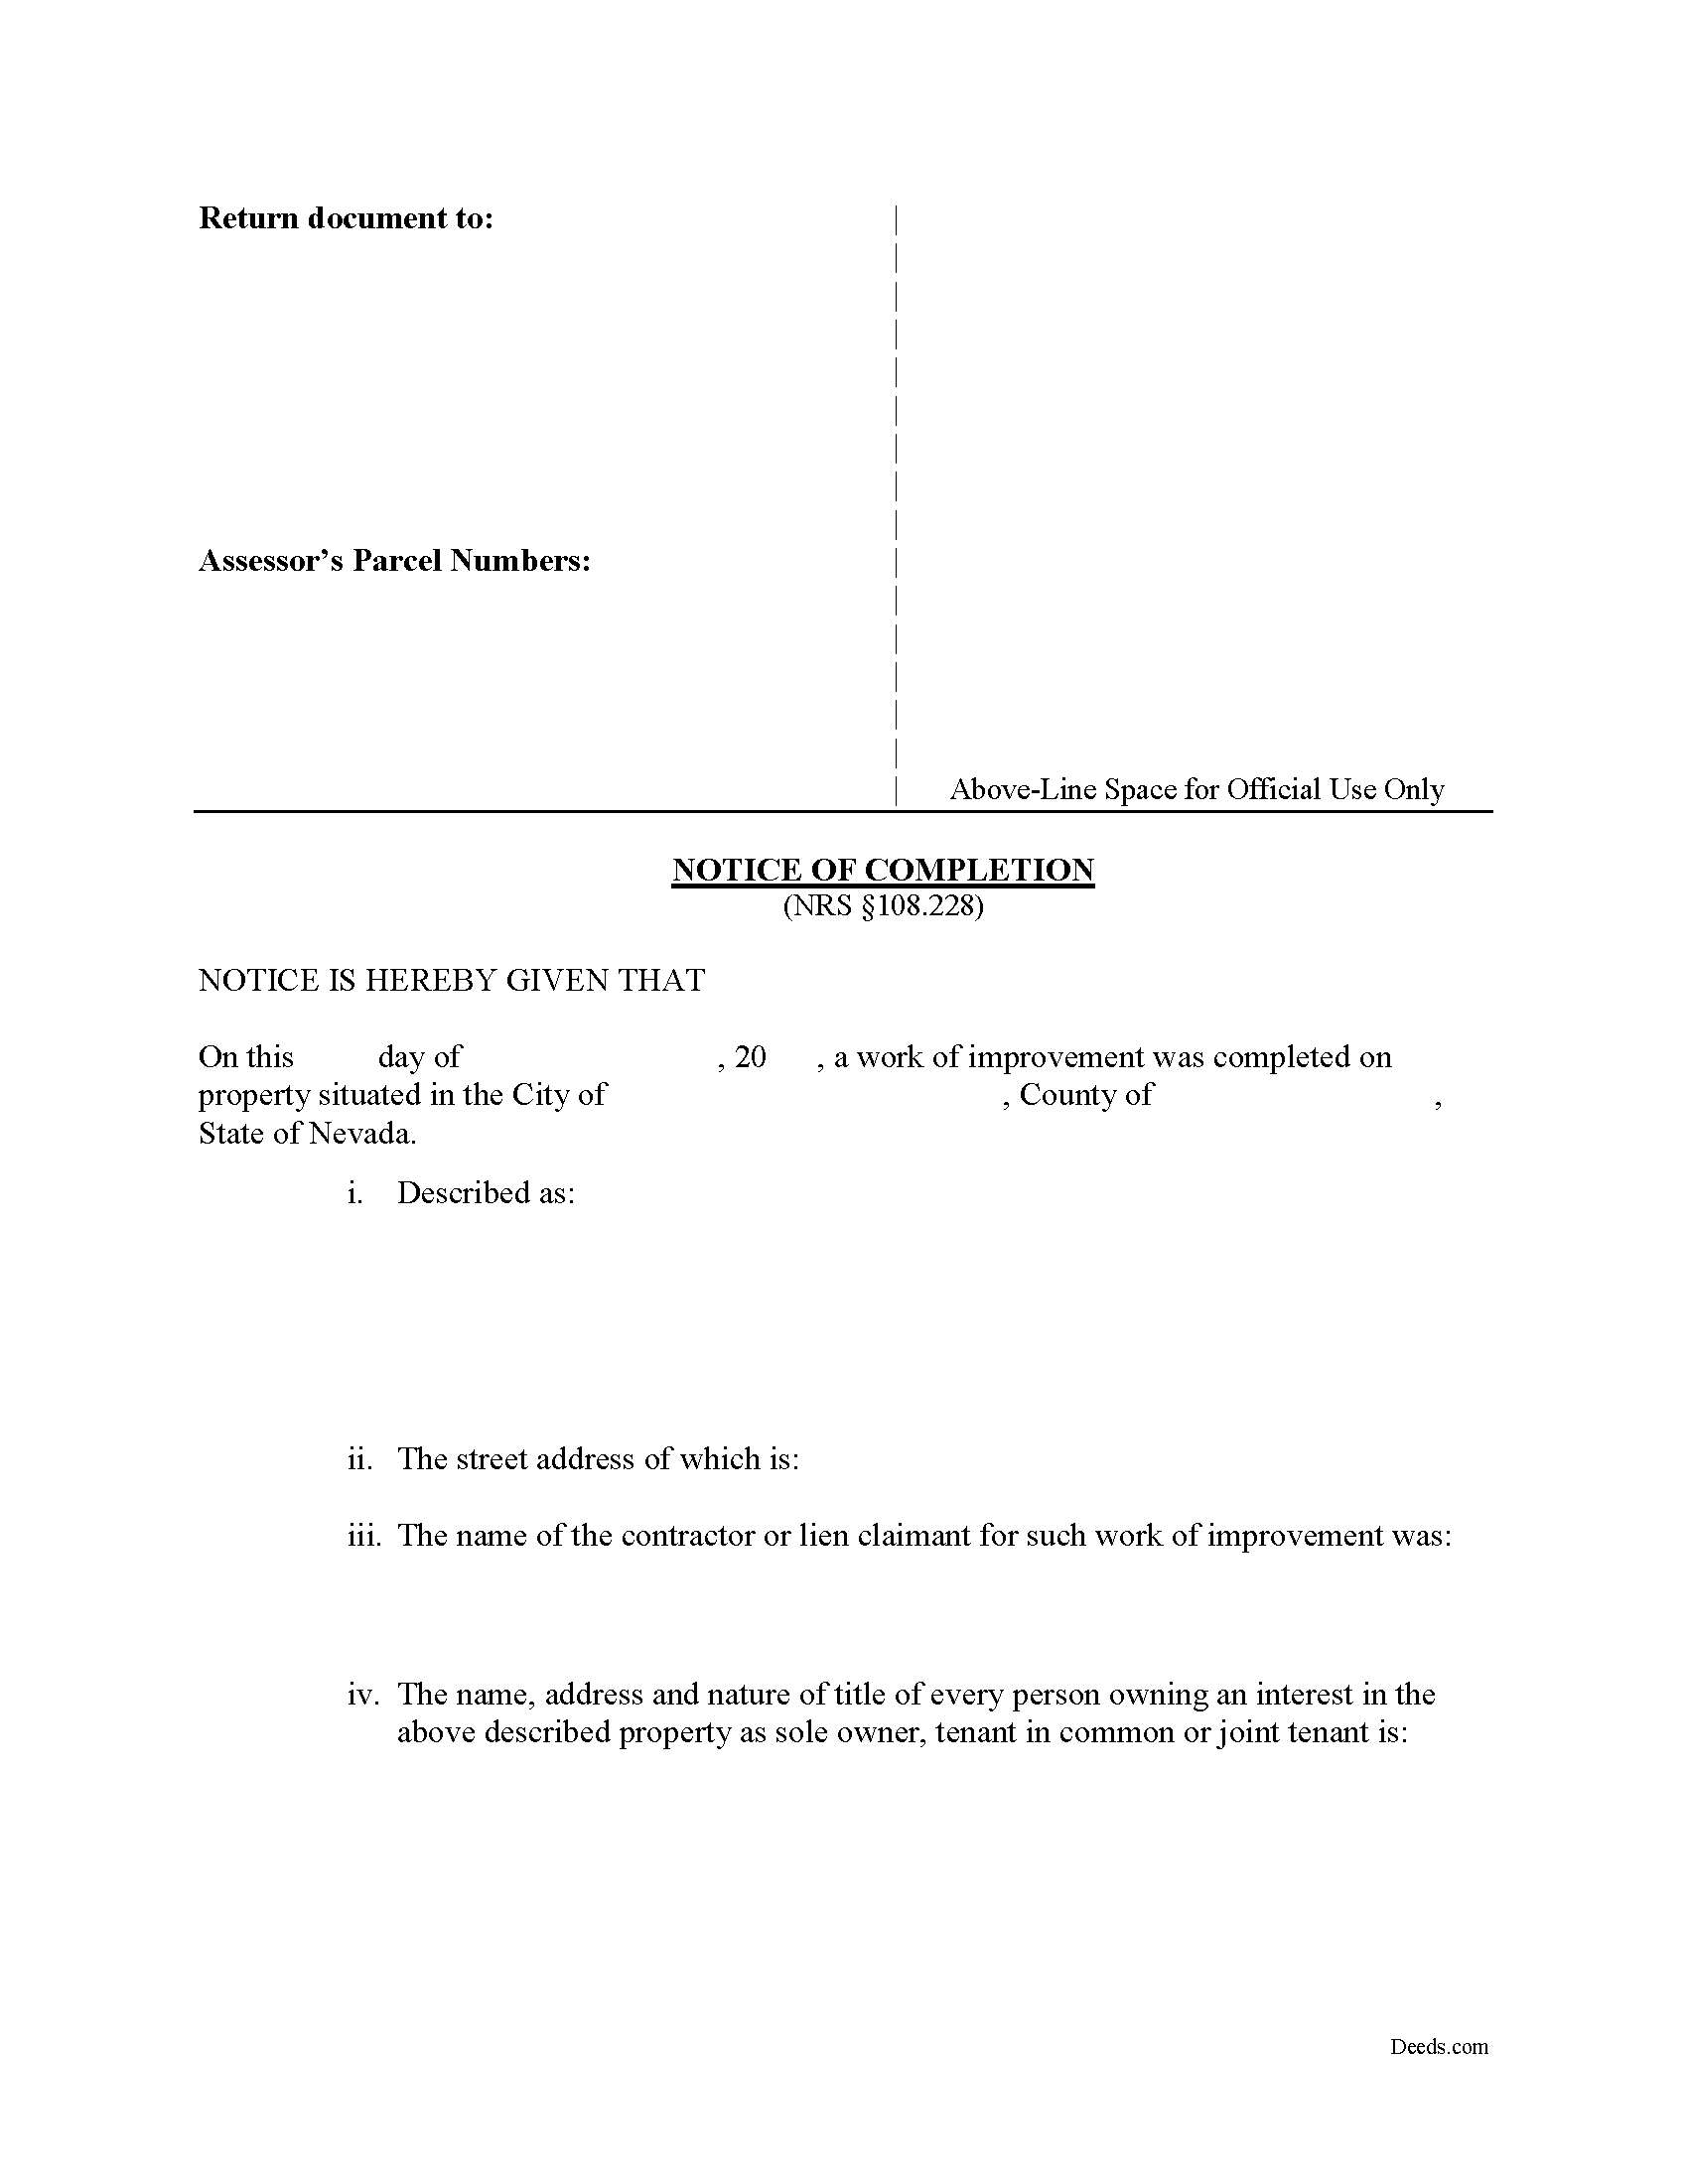 Notice of Completion Form